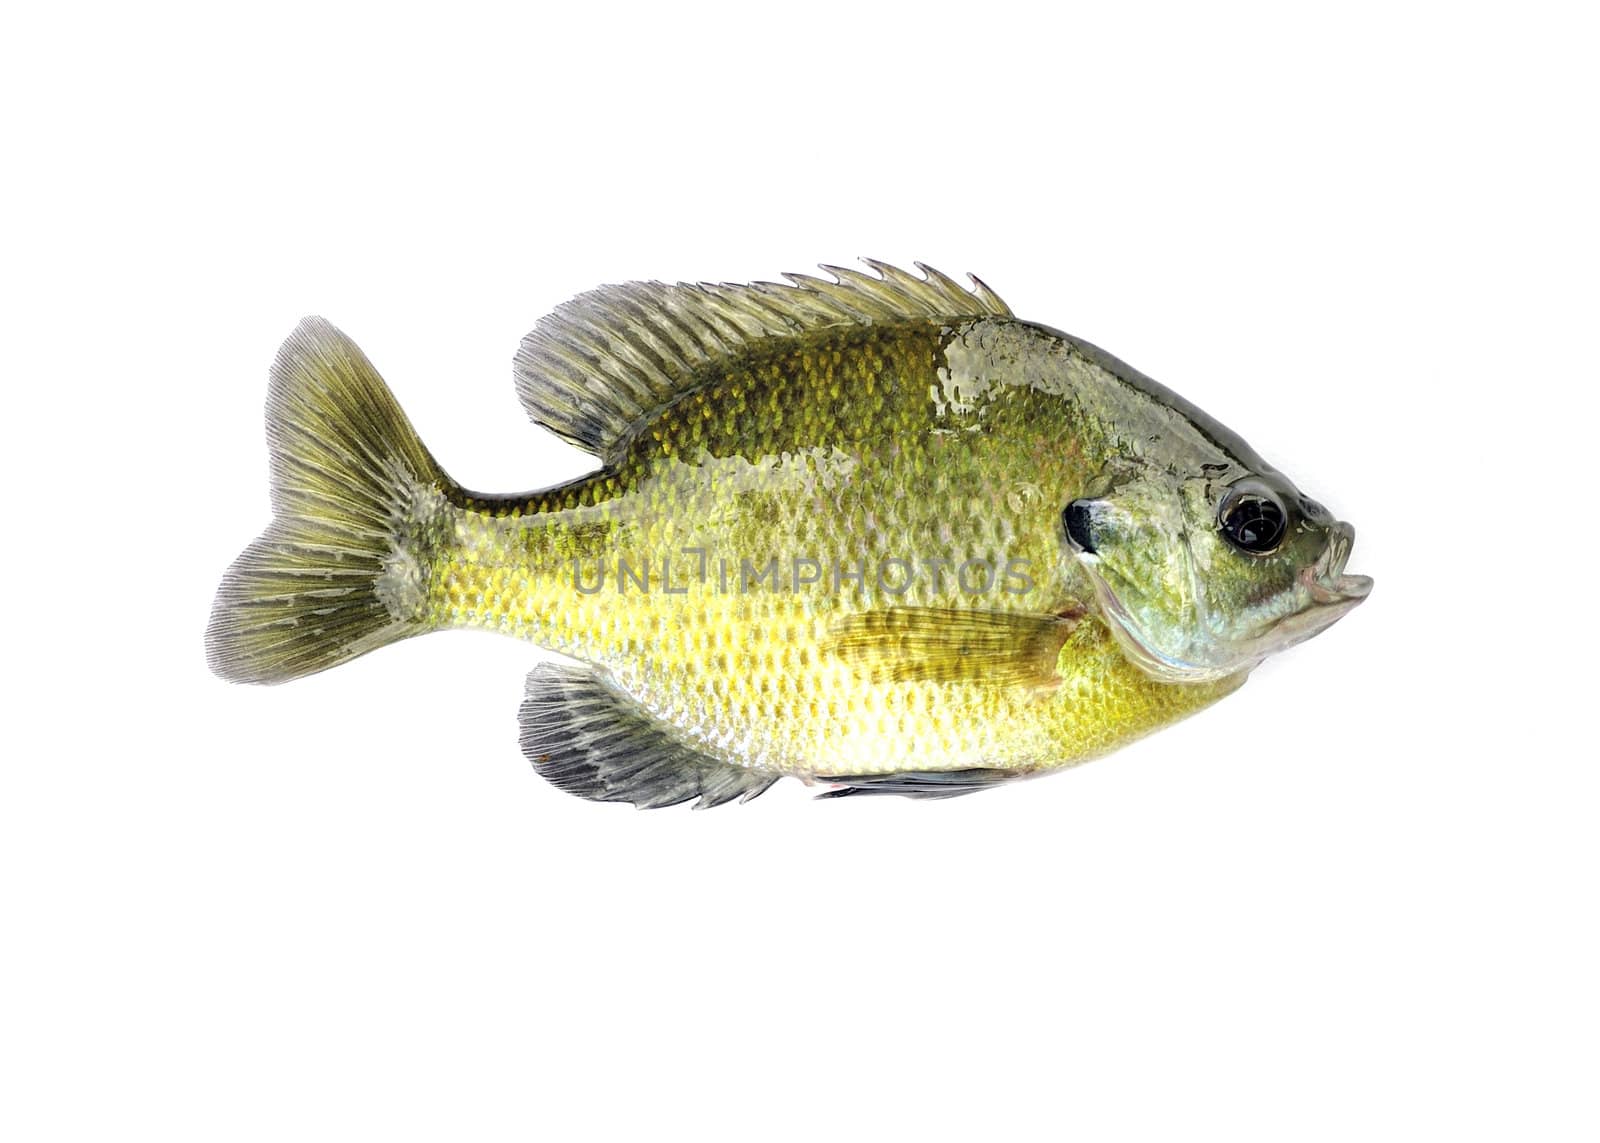 A freshwater sunfish from a pond.